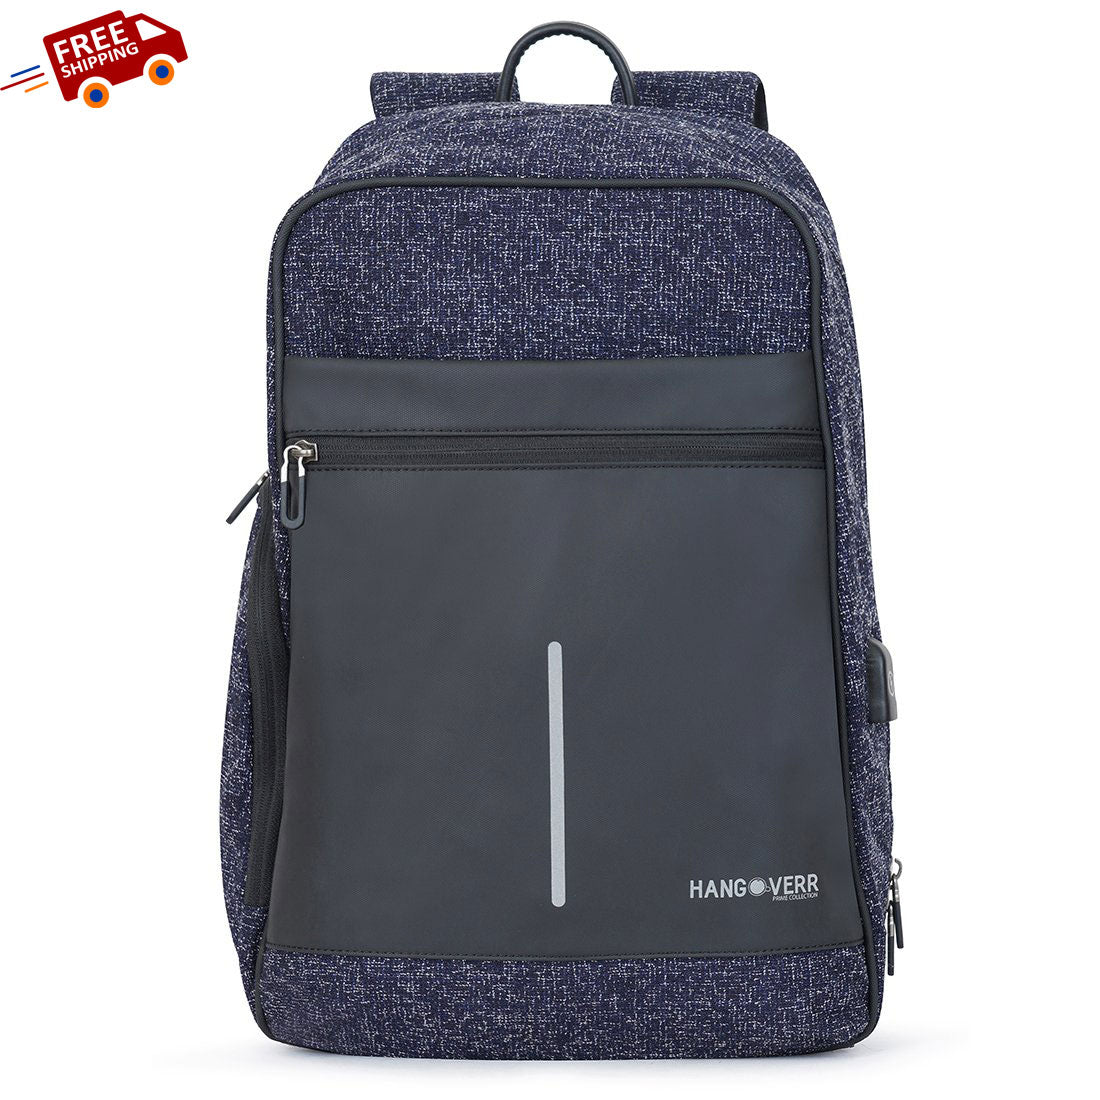 Hangoverr Anti Theft Laptop Backpack with USB Port and Security Pocket - Blue